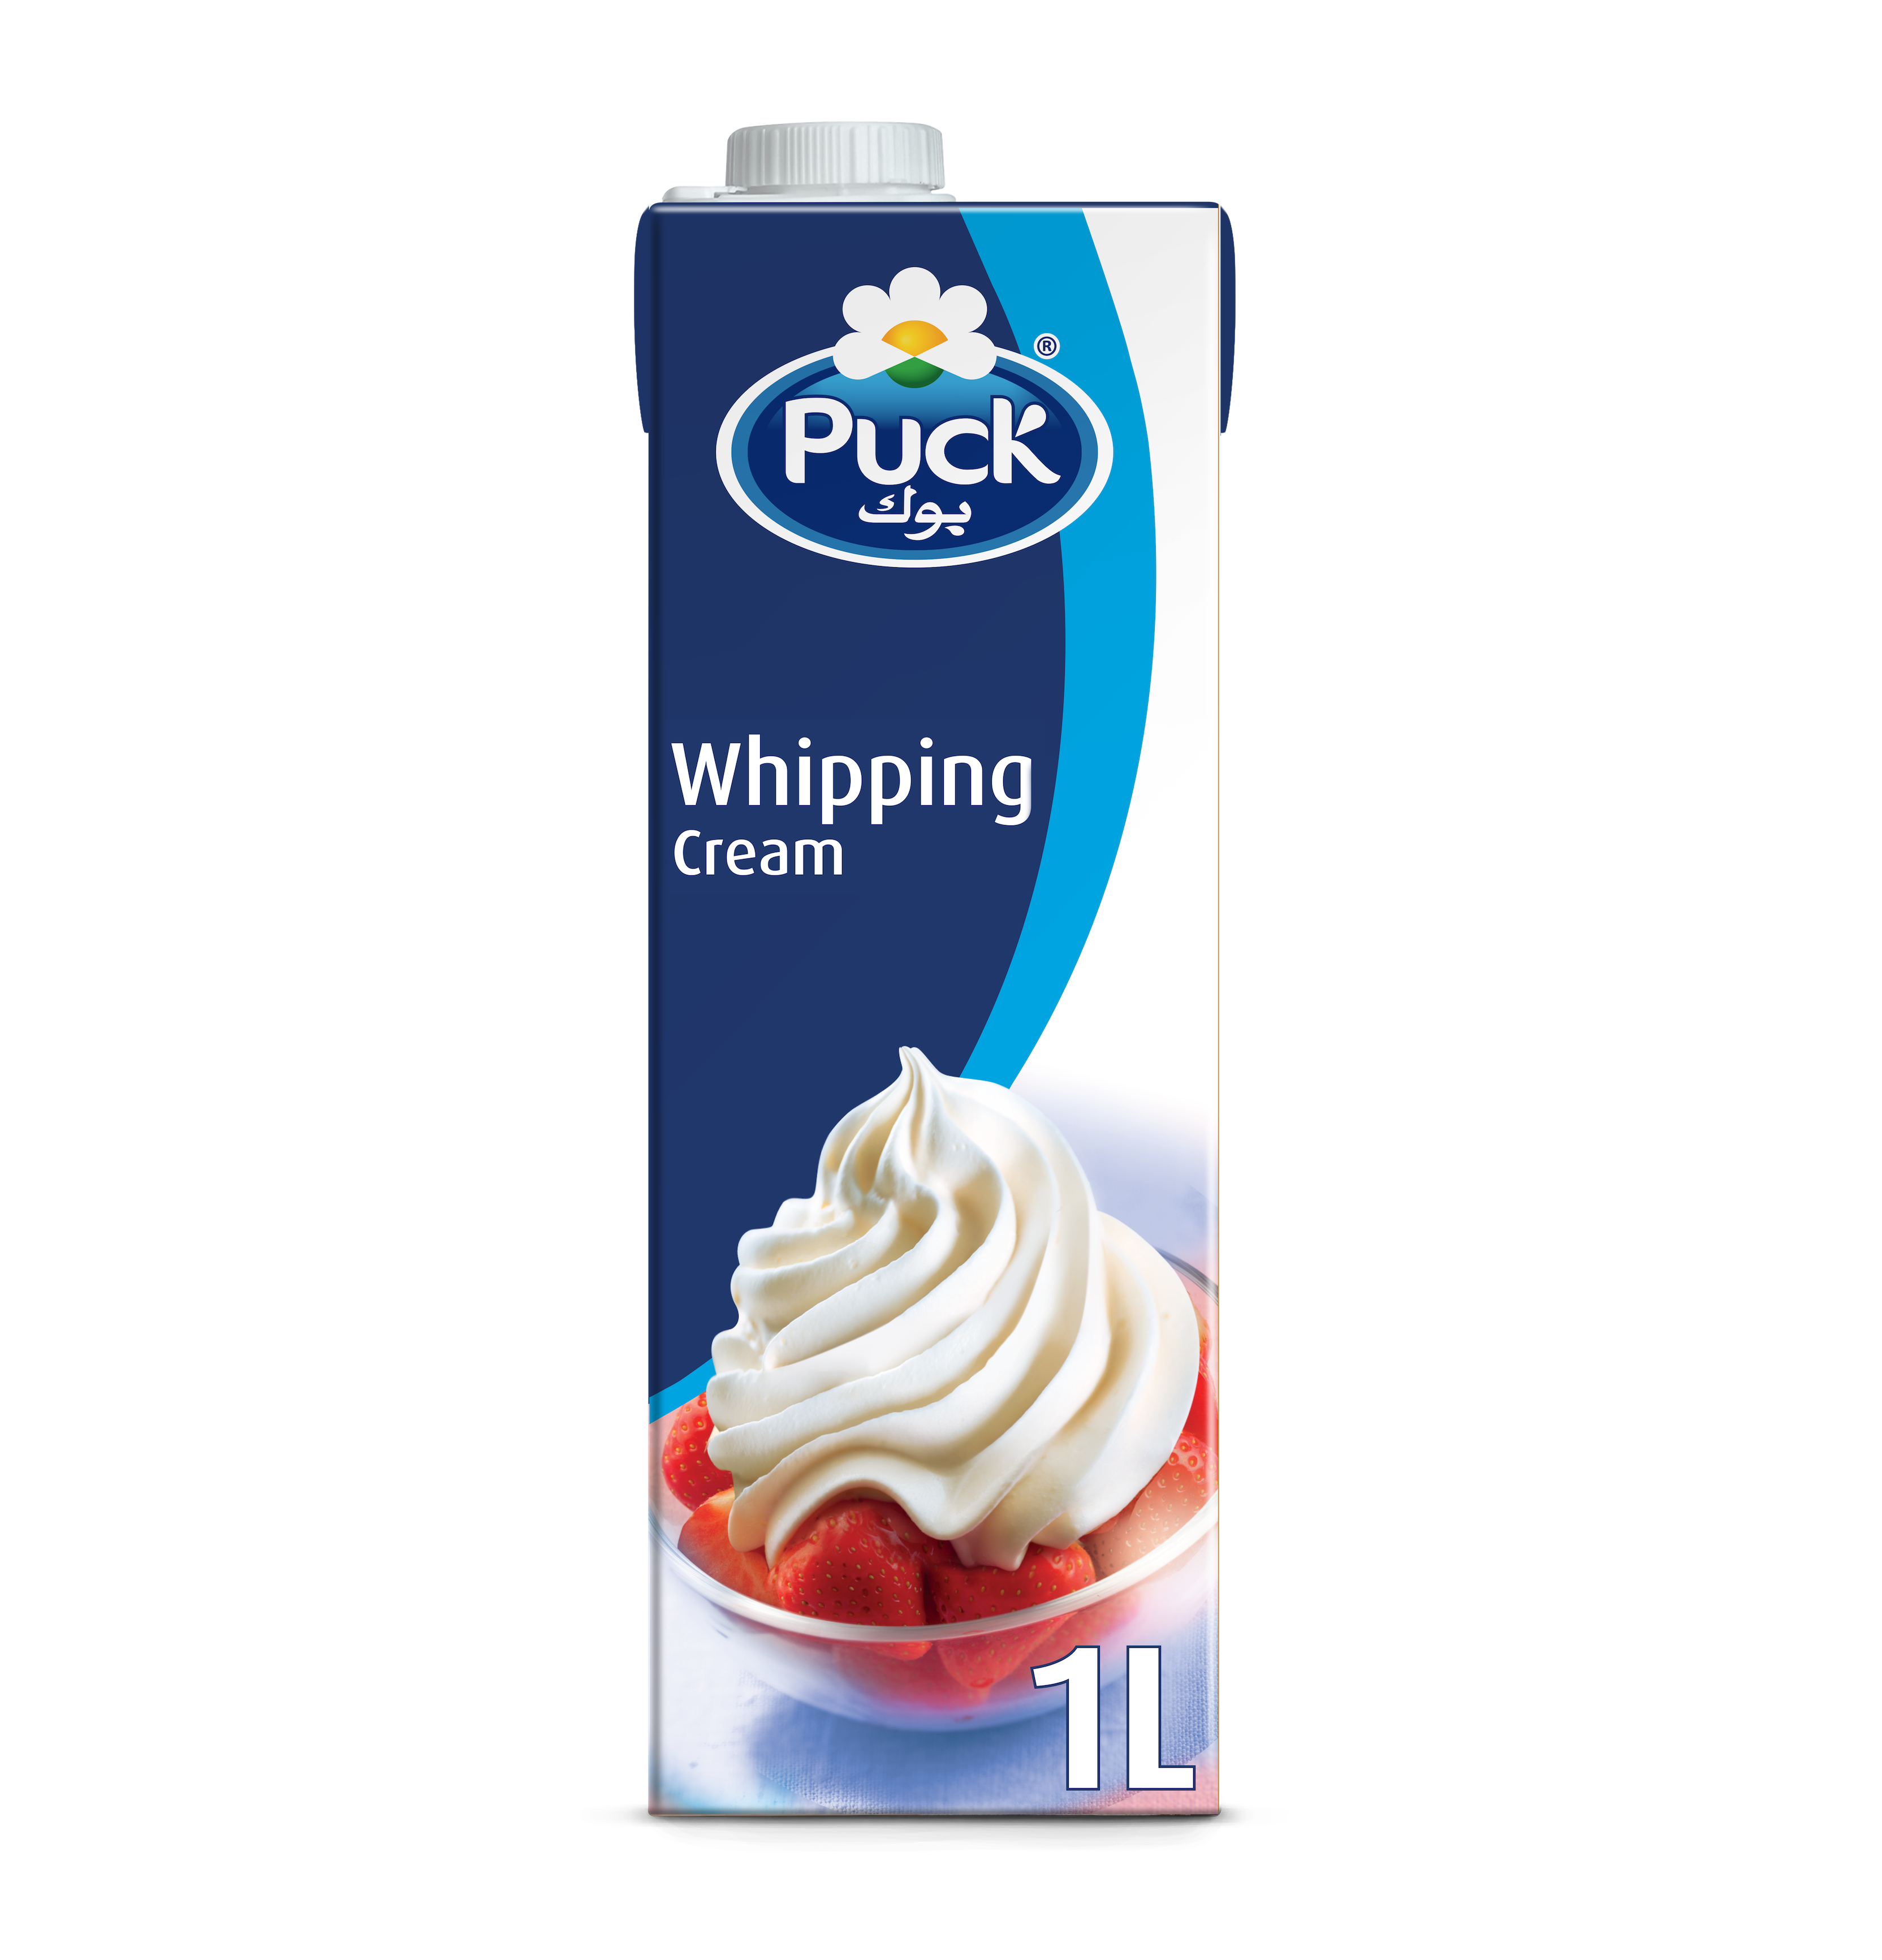 2 cups Puck® Whipping cream